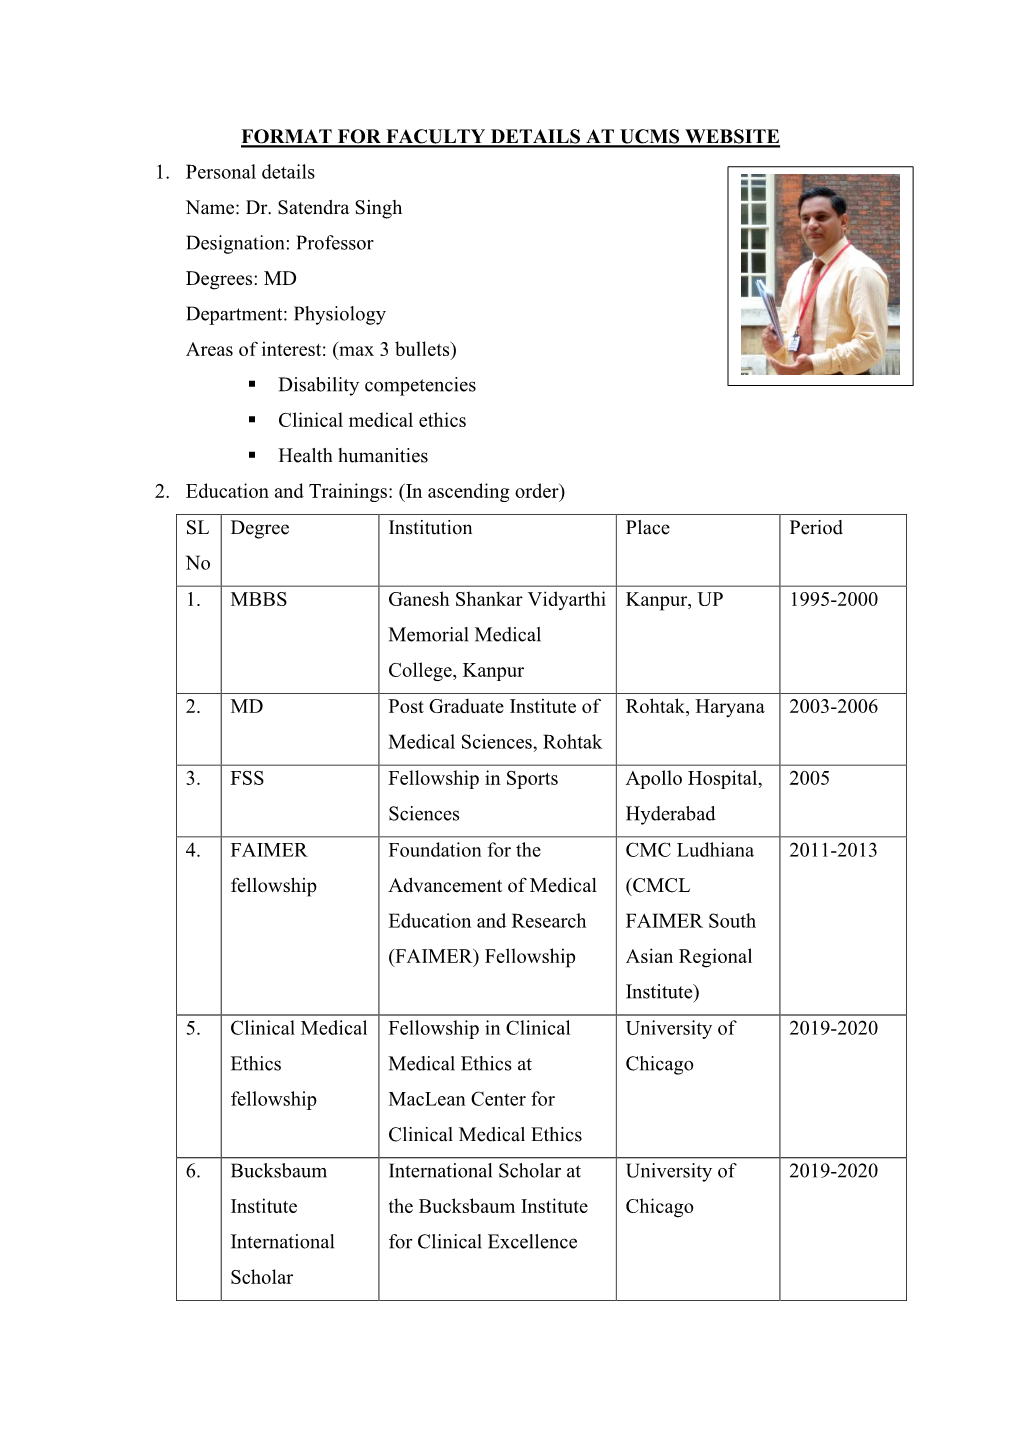 Dr. Satendra Singh Designation: Professor Degrees: MD Department: Physiology Areas of Interest: (Max 3 Bullets)